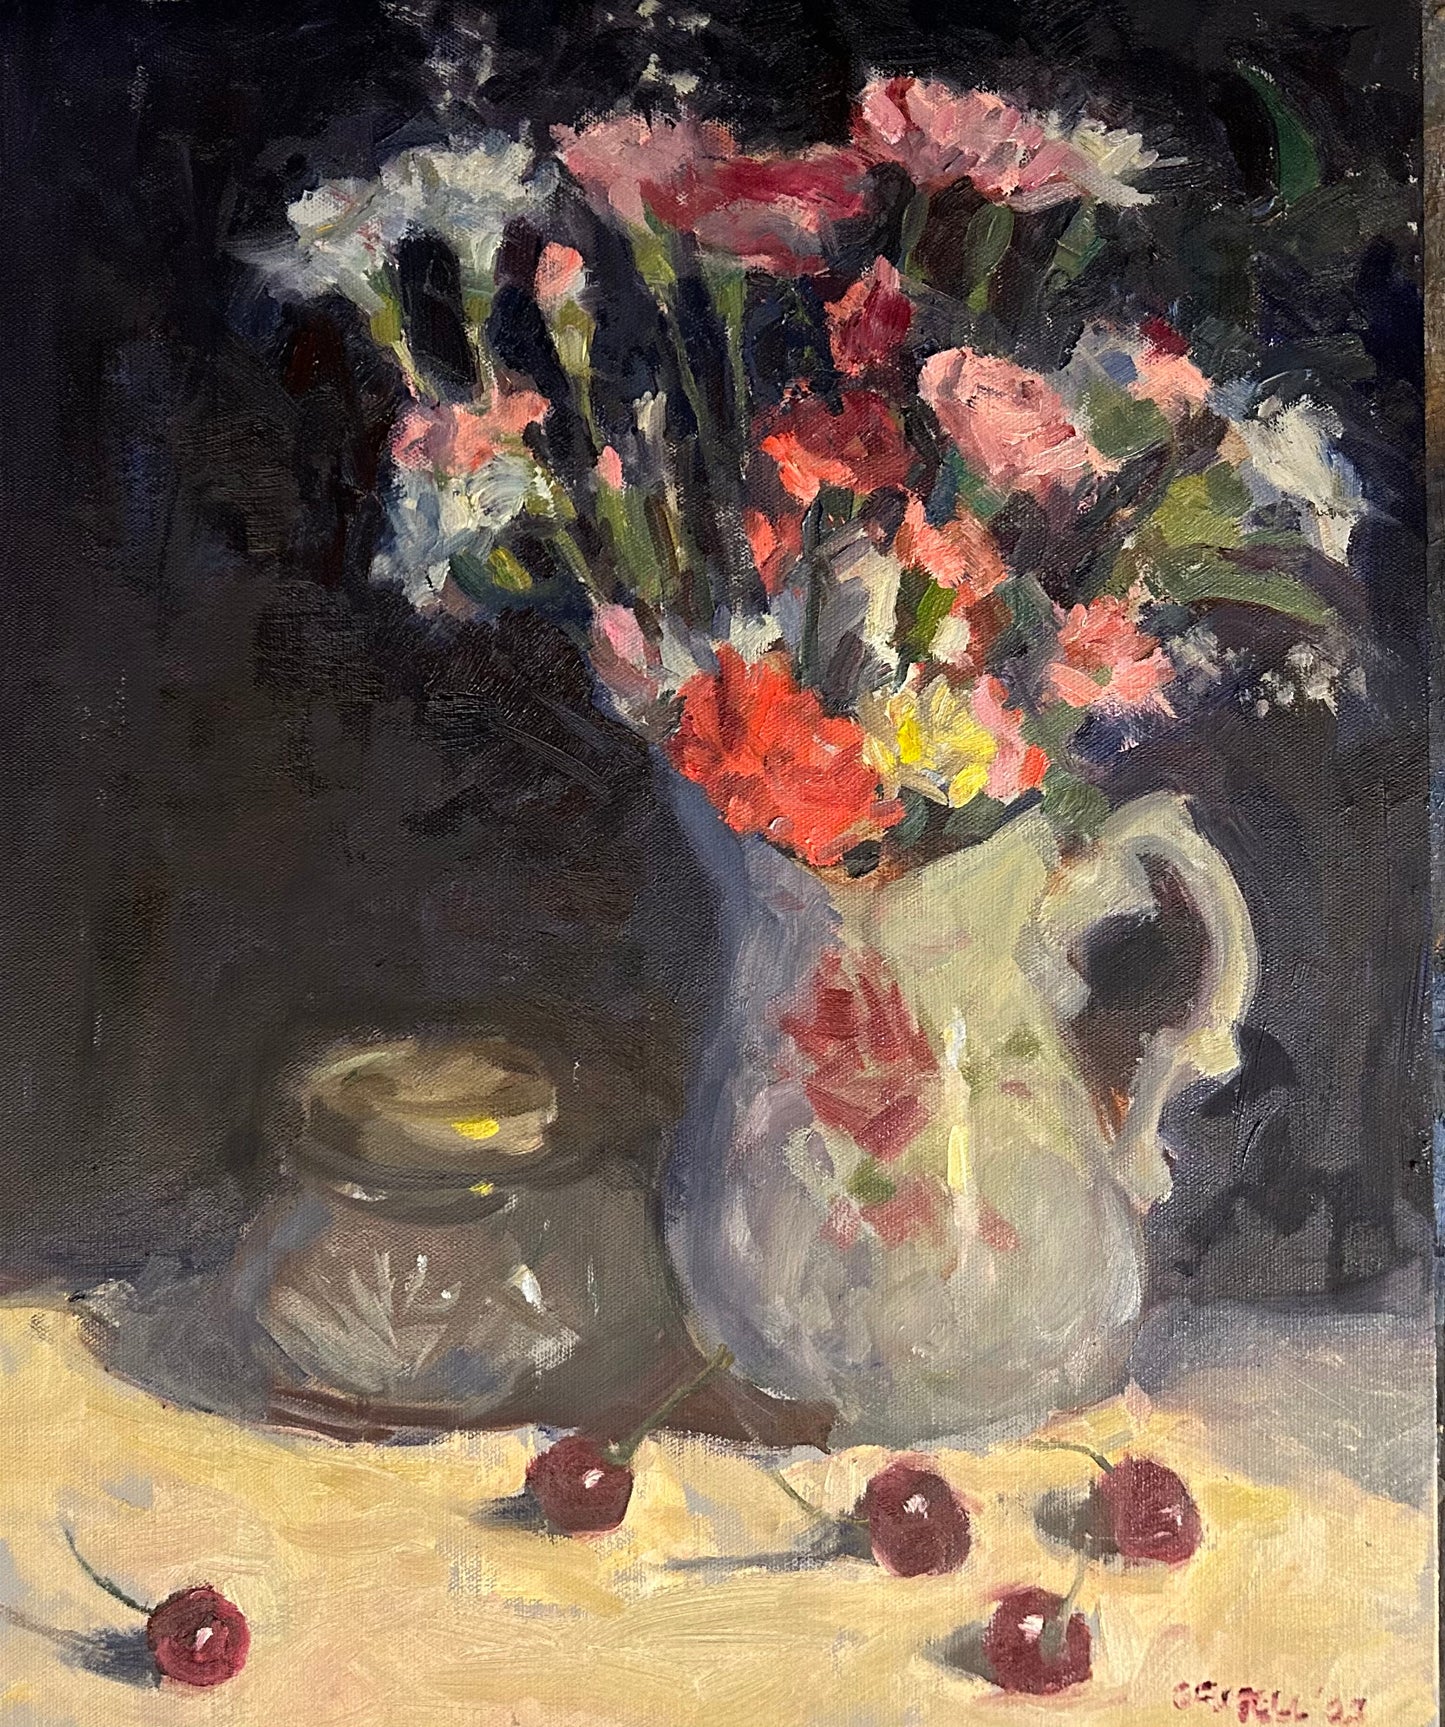 Carnations and Cherries (20 x 16 Inches)